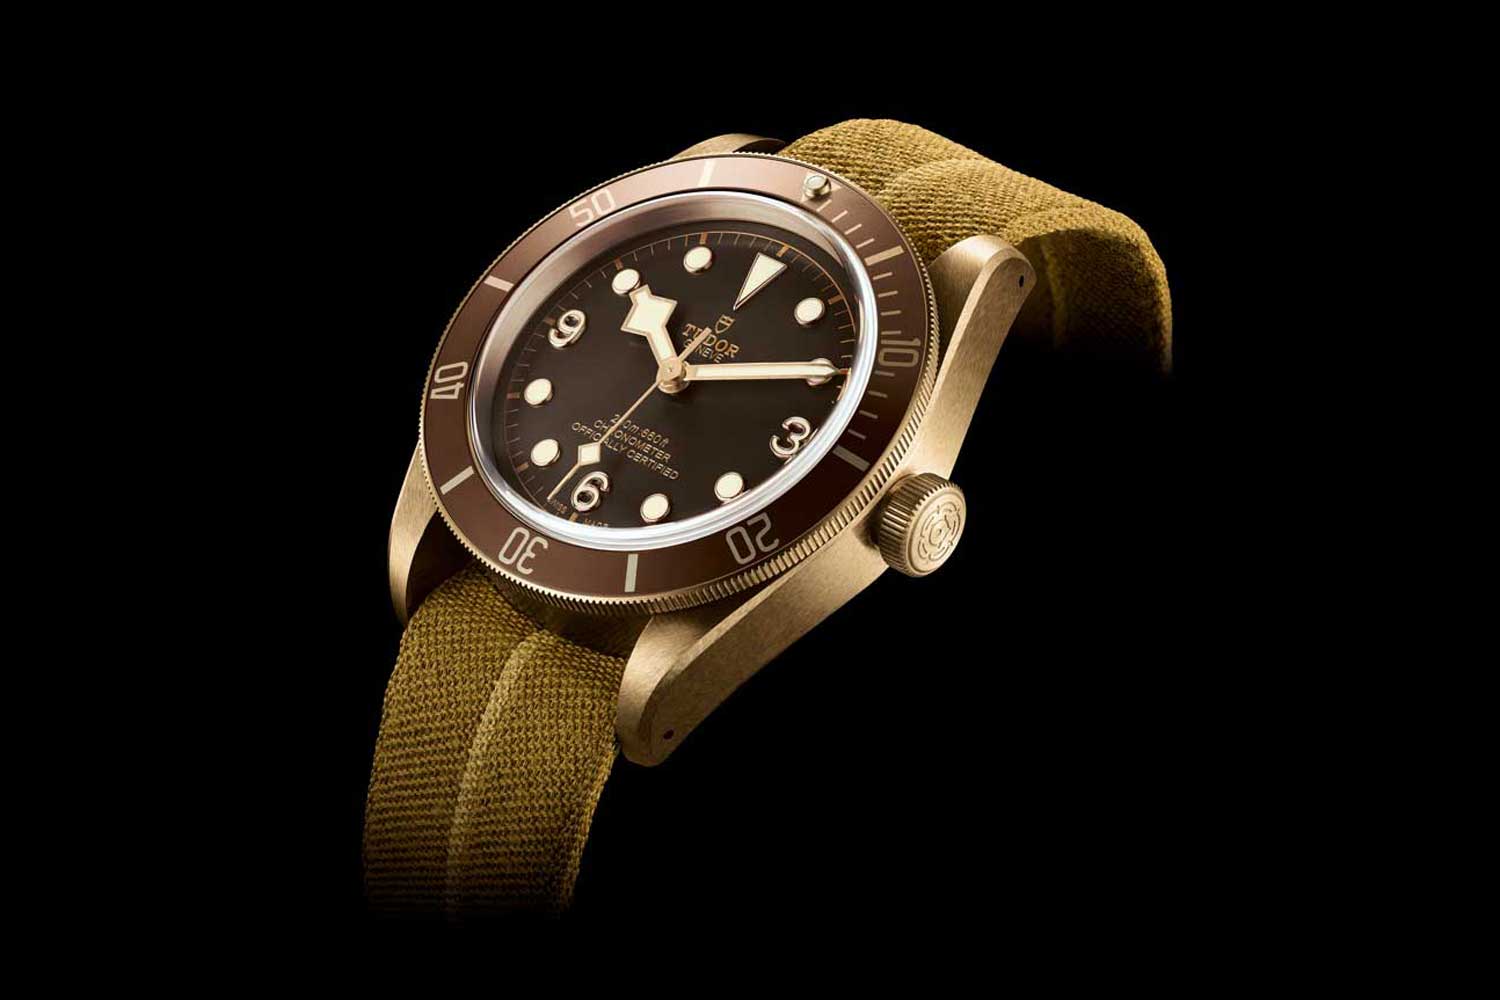 The phenomenal Black Bay Bronze that was introduced at Baselworld 2016